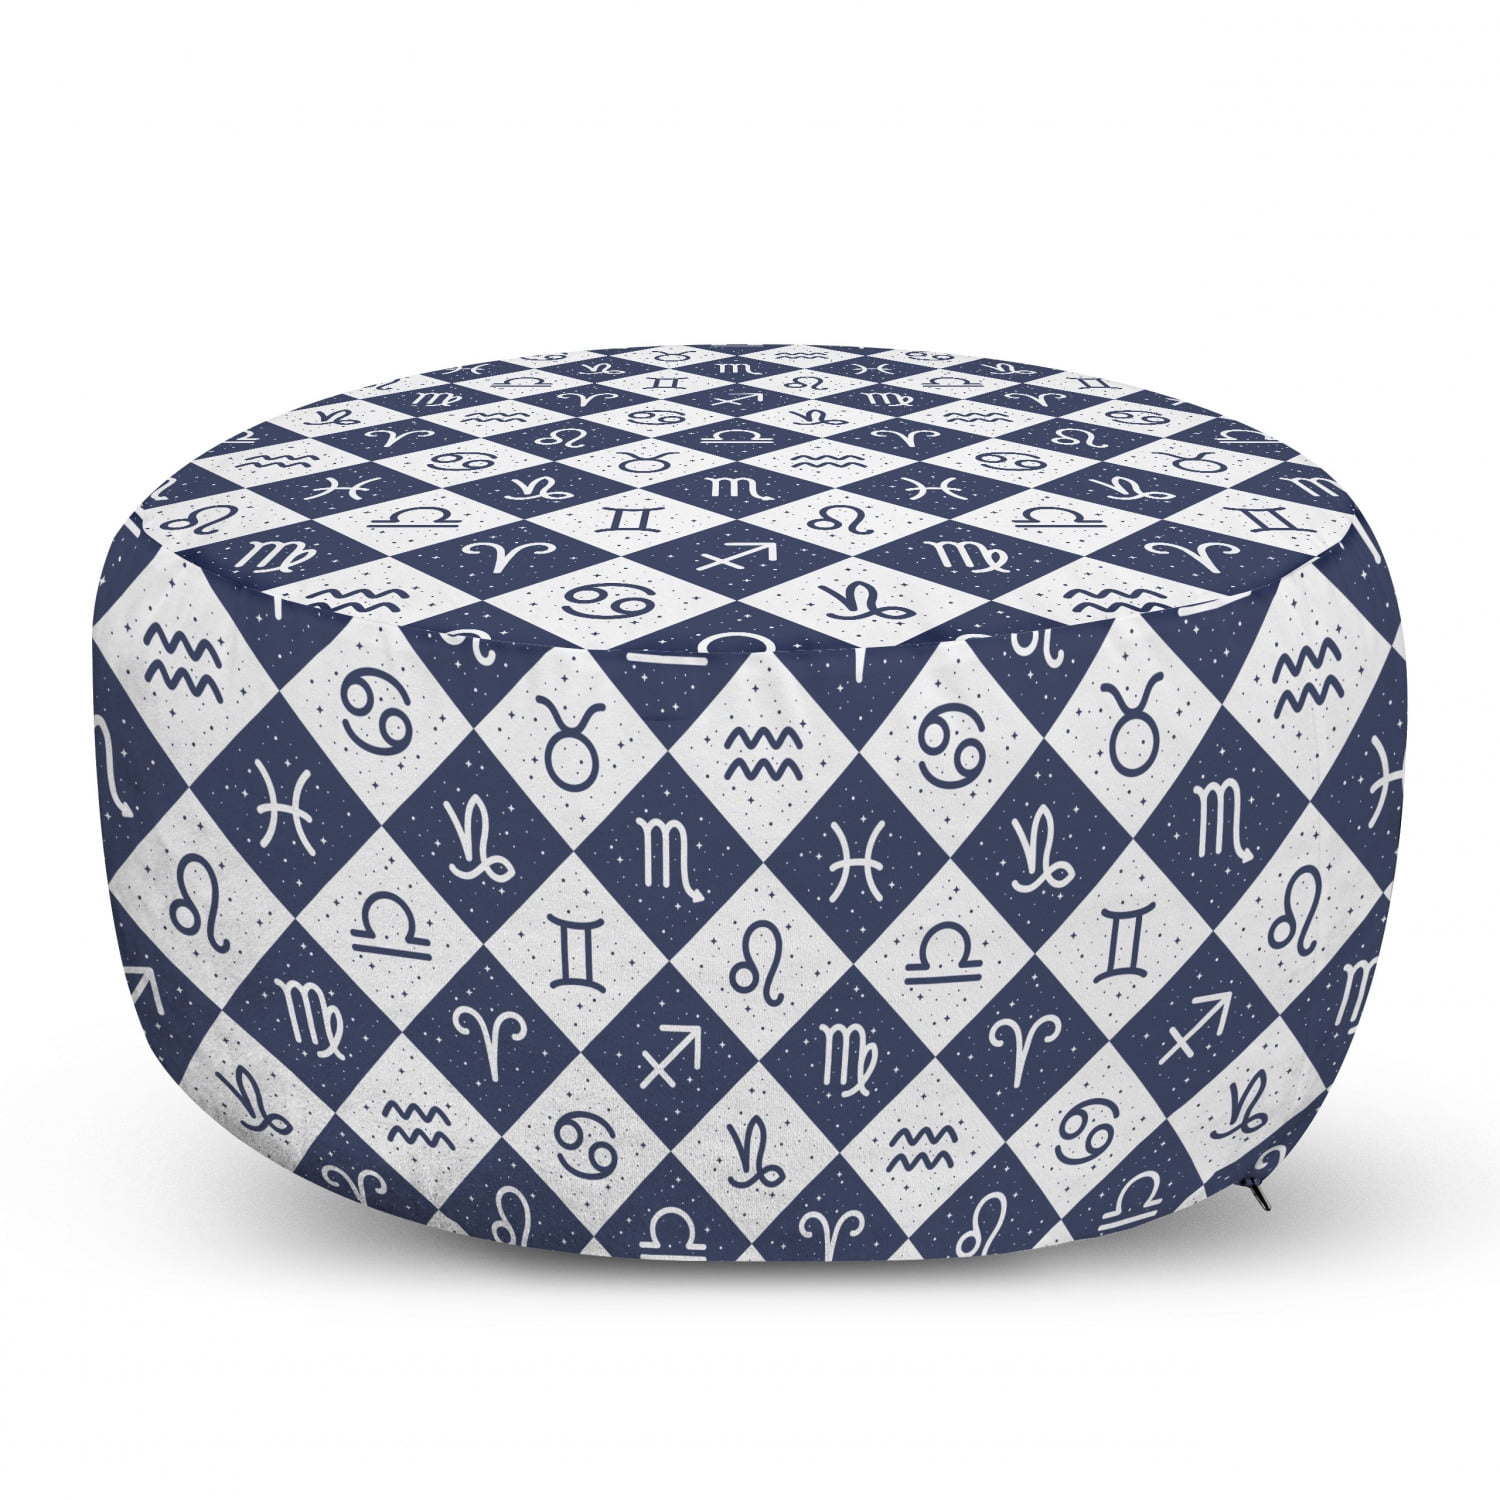 Orange Heraldry Pattern France History Kingdom Royalty Theme Ambesonne Fleur De Lis Ottoman Pouf Indigo Orange Decorative Soft Foot Rest with Removable Cover Living Room and Bedroom